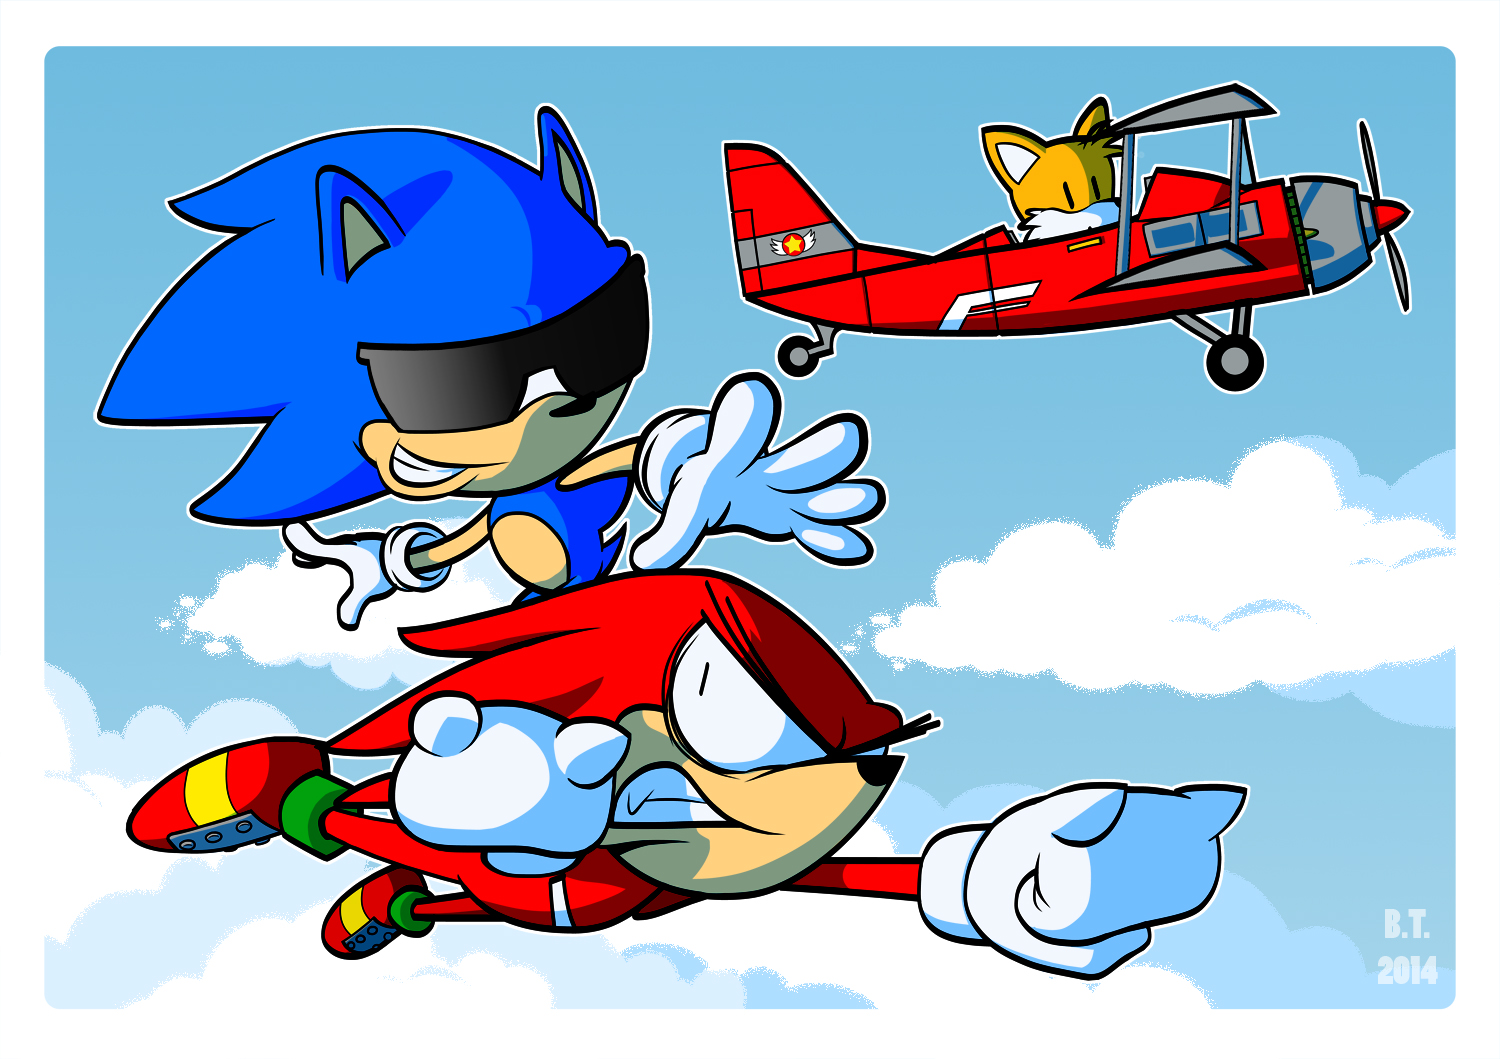 sonic the hedgehog, classic sonic, video game, sonic the hedgehog 3, classic knuckles, classic tails, knuckles the echidna, miles 'tails' prower, sonic